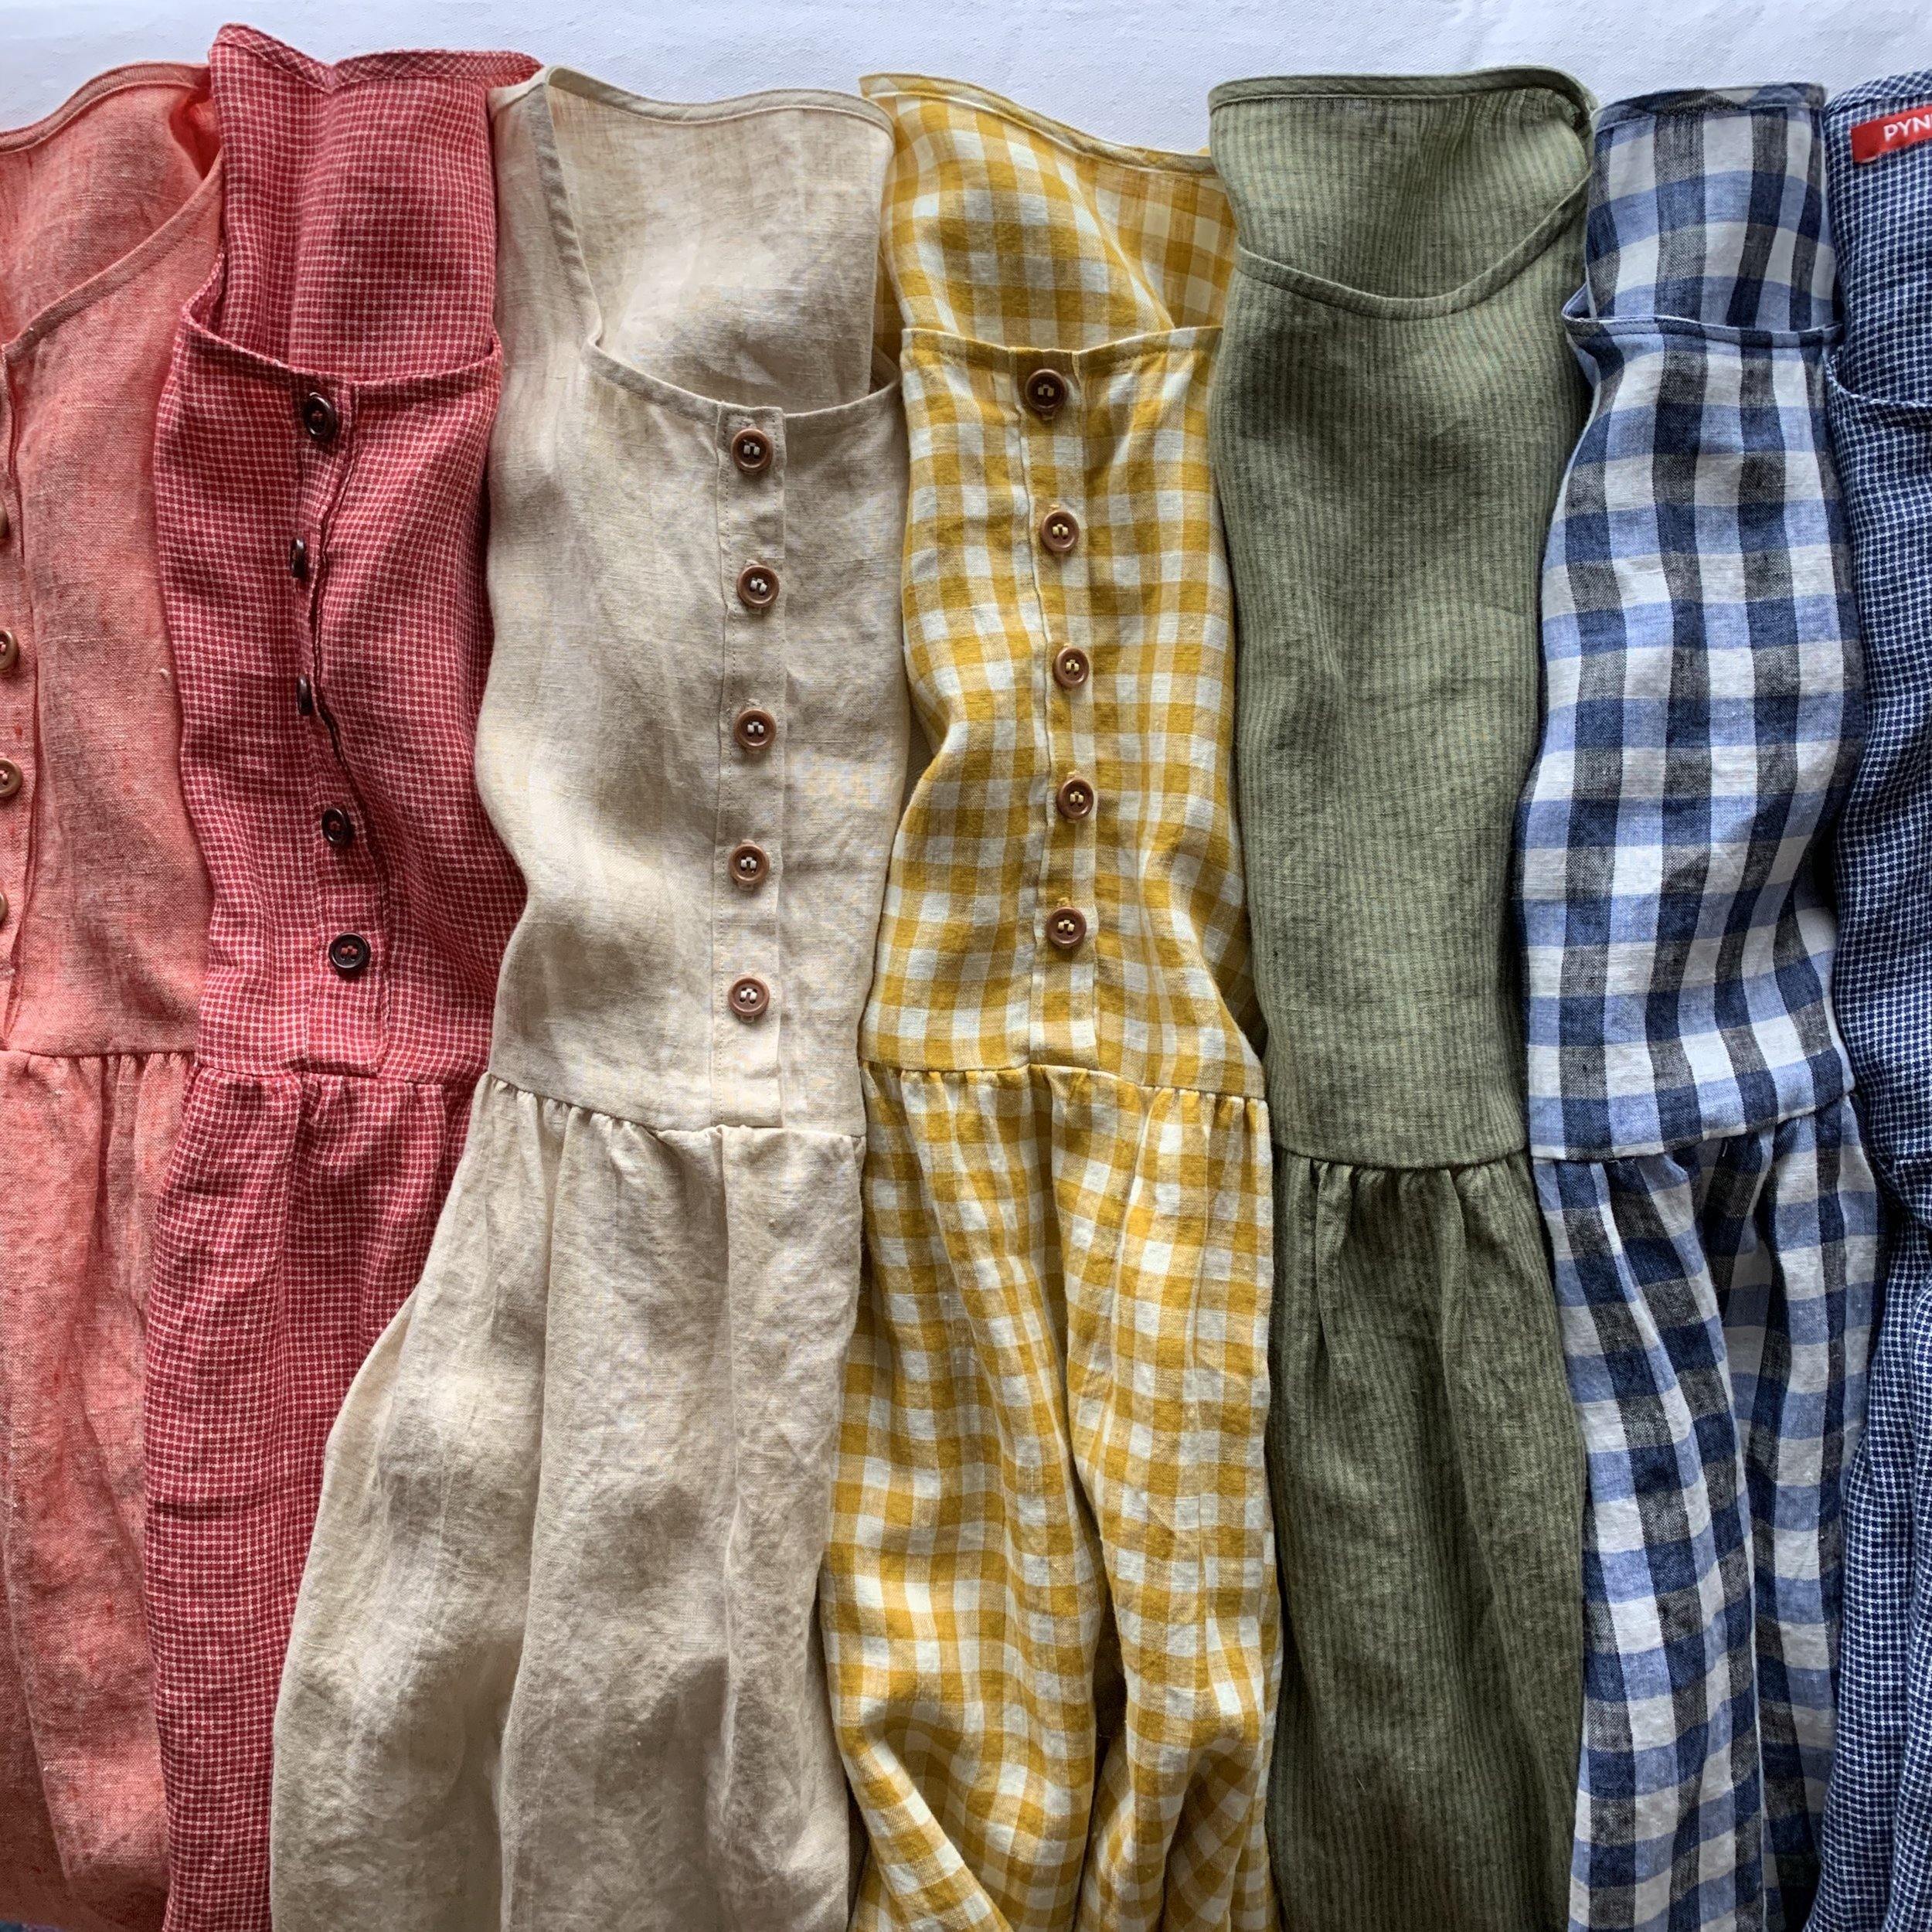 Linen, How Beneficial It Is, and Why We Love It - Pyne and Smith Clothiers